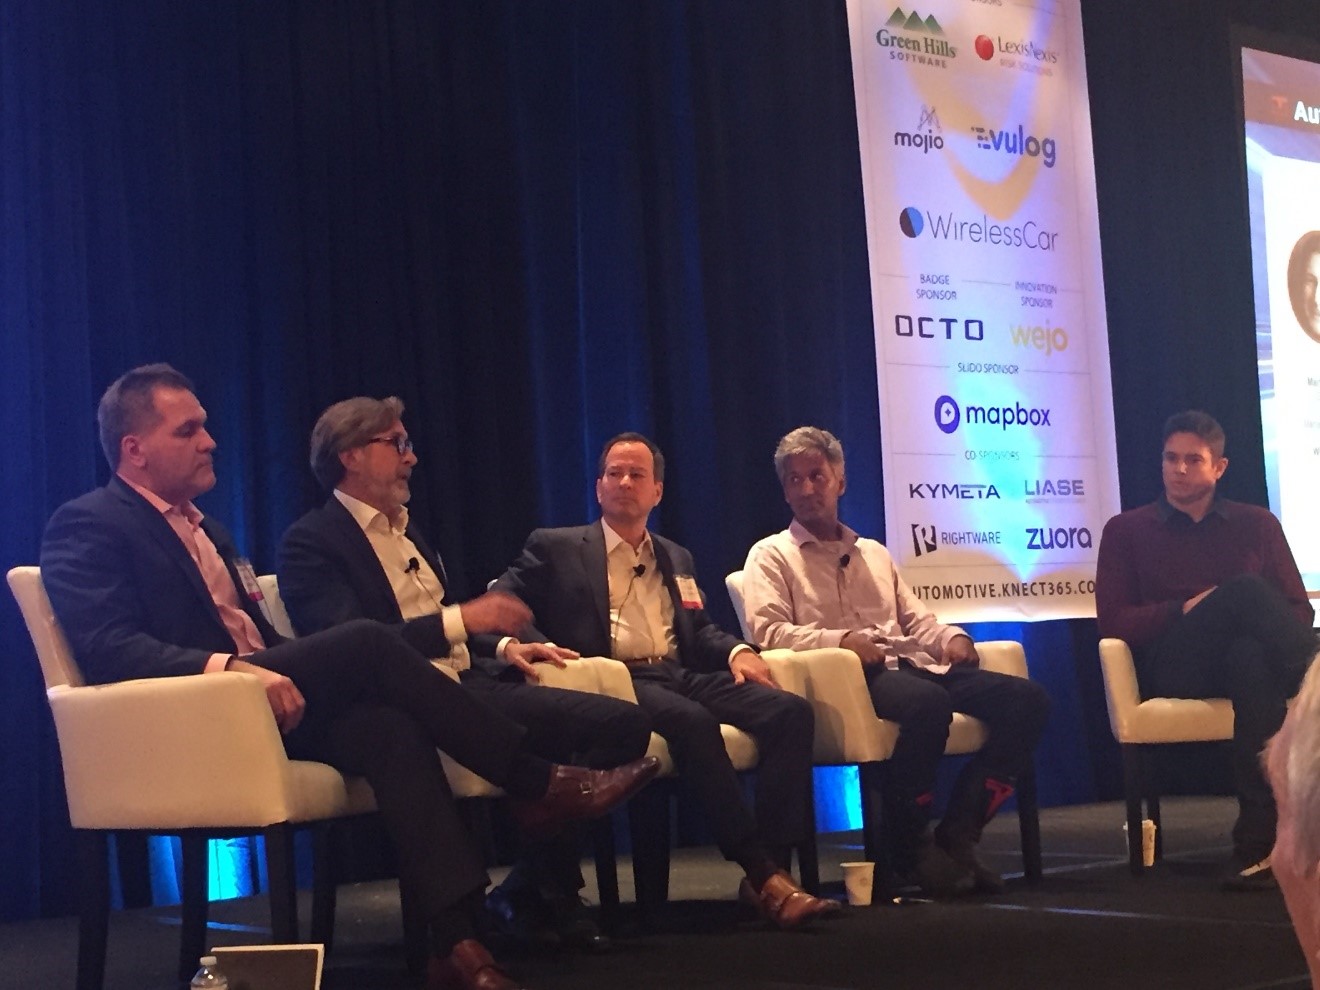 John Bukowicz, Managing Director Americas, LIASE Group speaking on a panel at the 2018 Consumer Telematics Show with Martin Rossell, Managing Director, WirelessCar; Rahul Sonnad, CEO & Co-Founder, Tesloop; Cletus Nunes, Director of Sales, Octo Telematics North America; Russ Lemmer, EVP of Mobility, Silvercar.